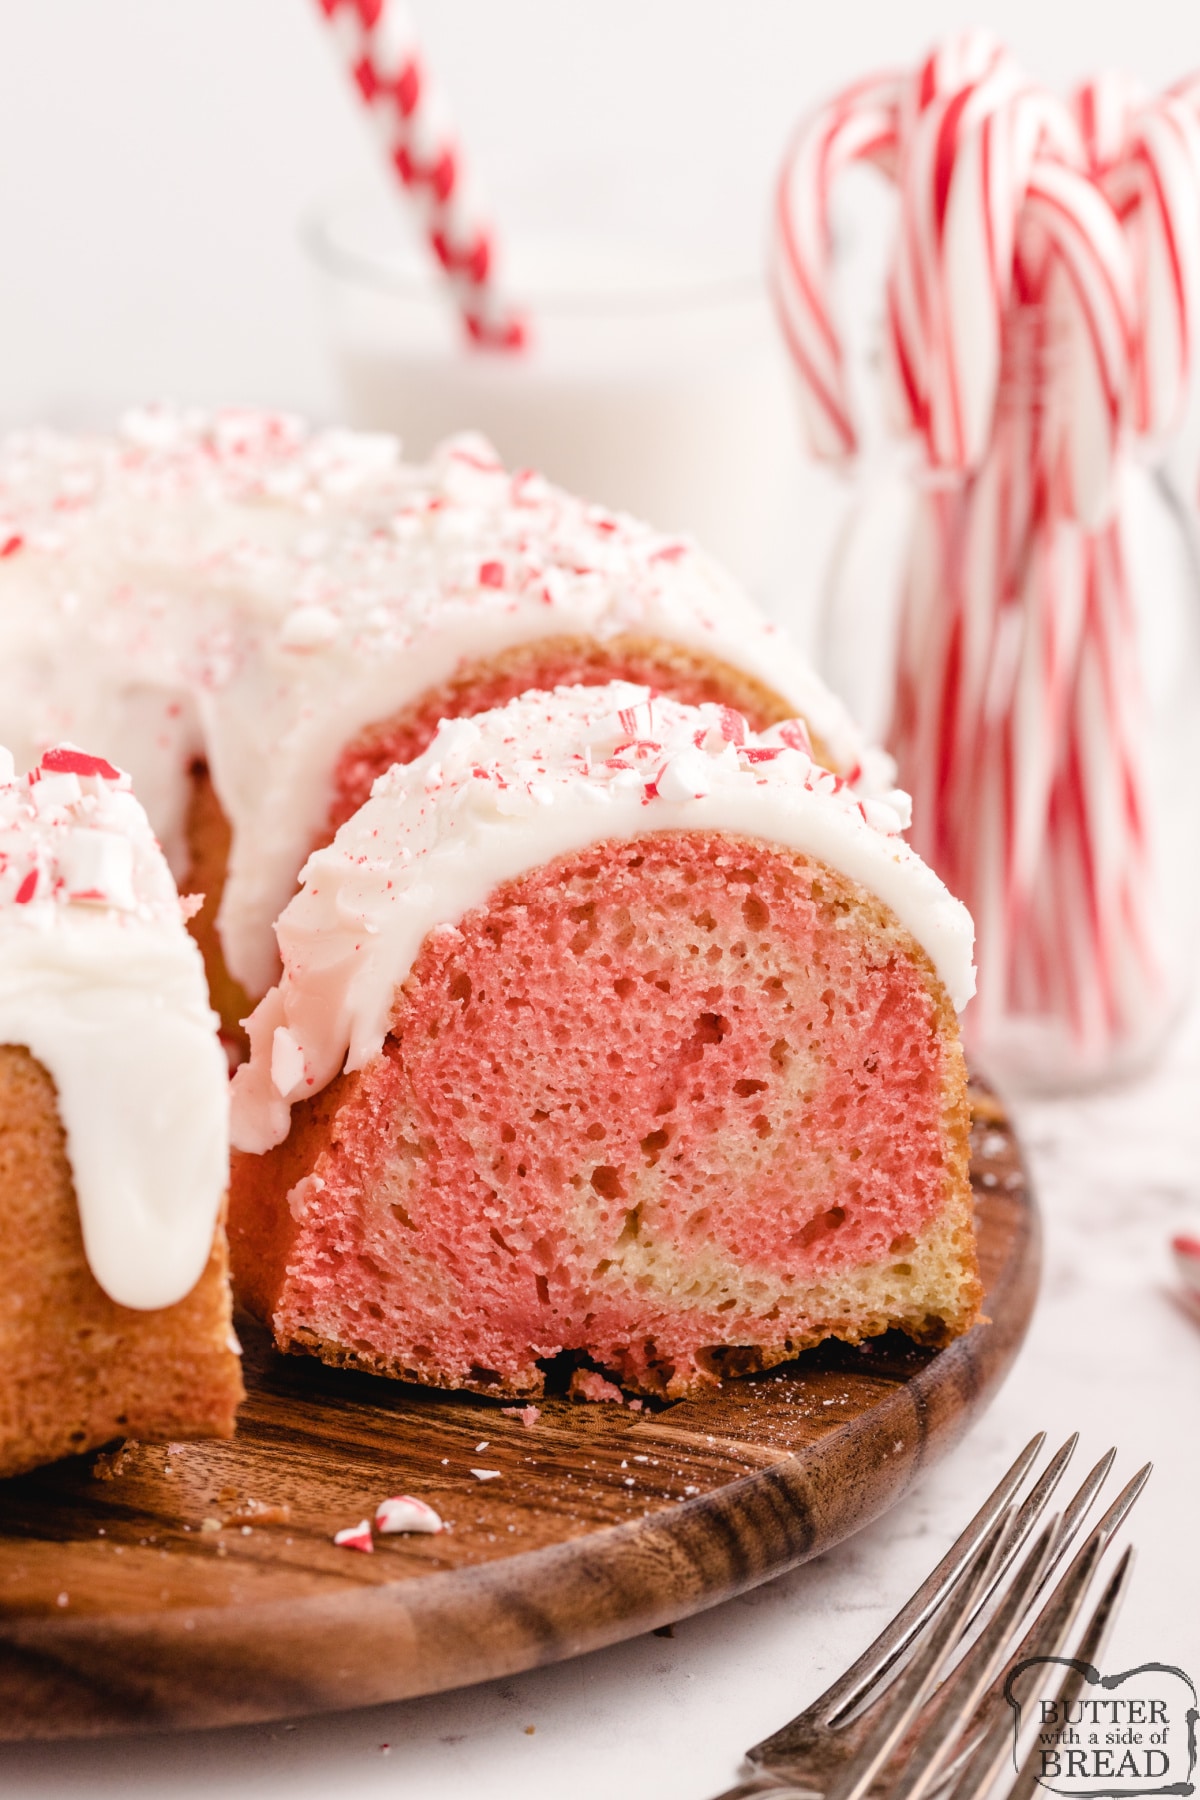 Swirled Peppermint Bundt Cake is a simple, from-scratch cake recipe flavored with peppermint and topped with a thick, creamy glaze. Beautiful peppermint cake recipe that is absolutely delicious too!